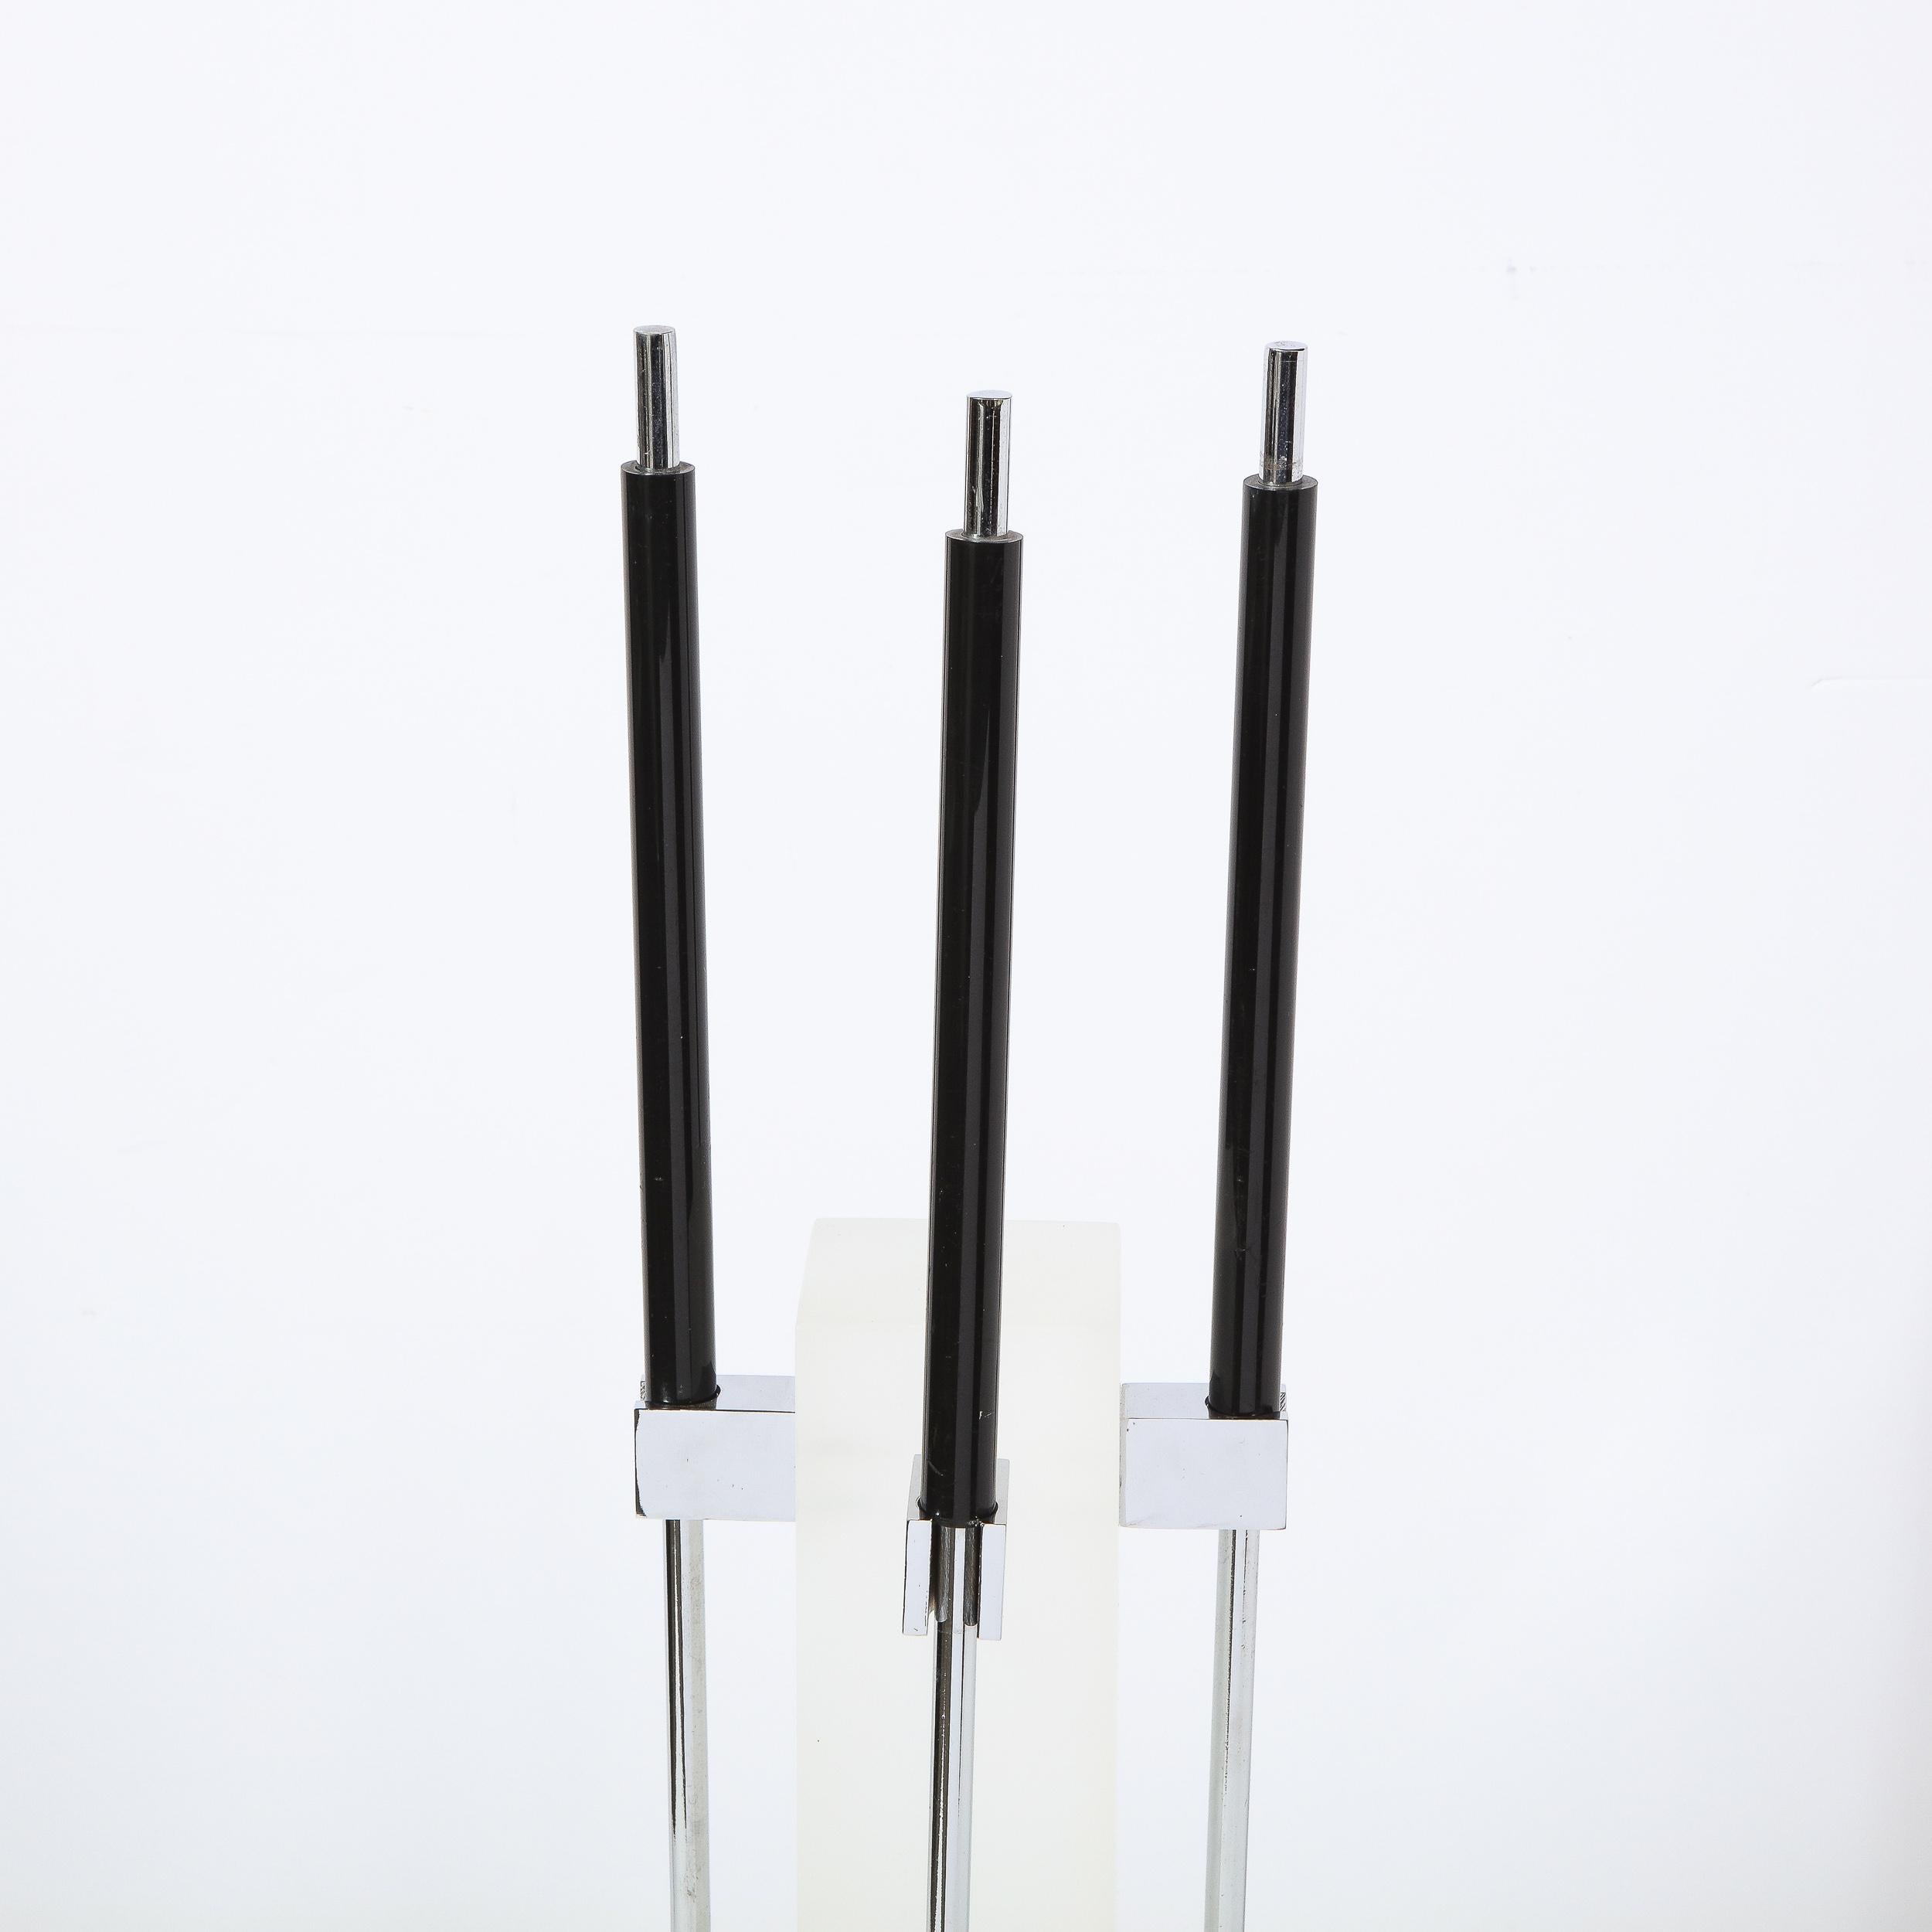 This sophisticated fire tool set was realized by the esteemed American maker Pace Furniture Co. circa 1970. It features a central slender rectangular frosted lucite body sitting atop a rectangular polished chrome base. Three rectangular arms with